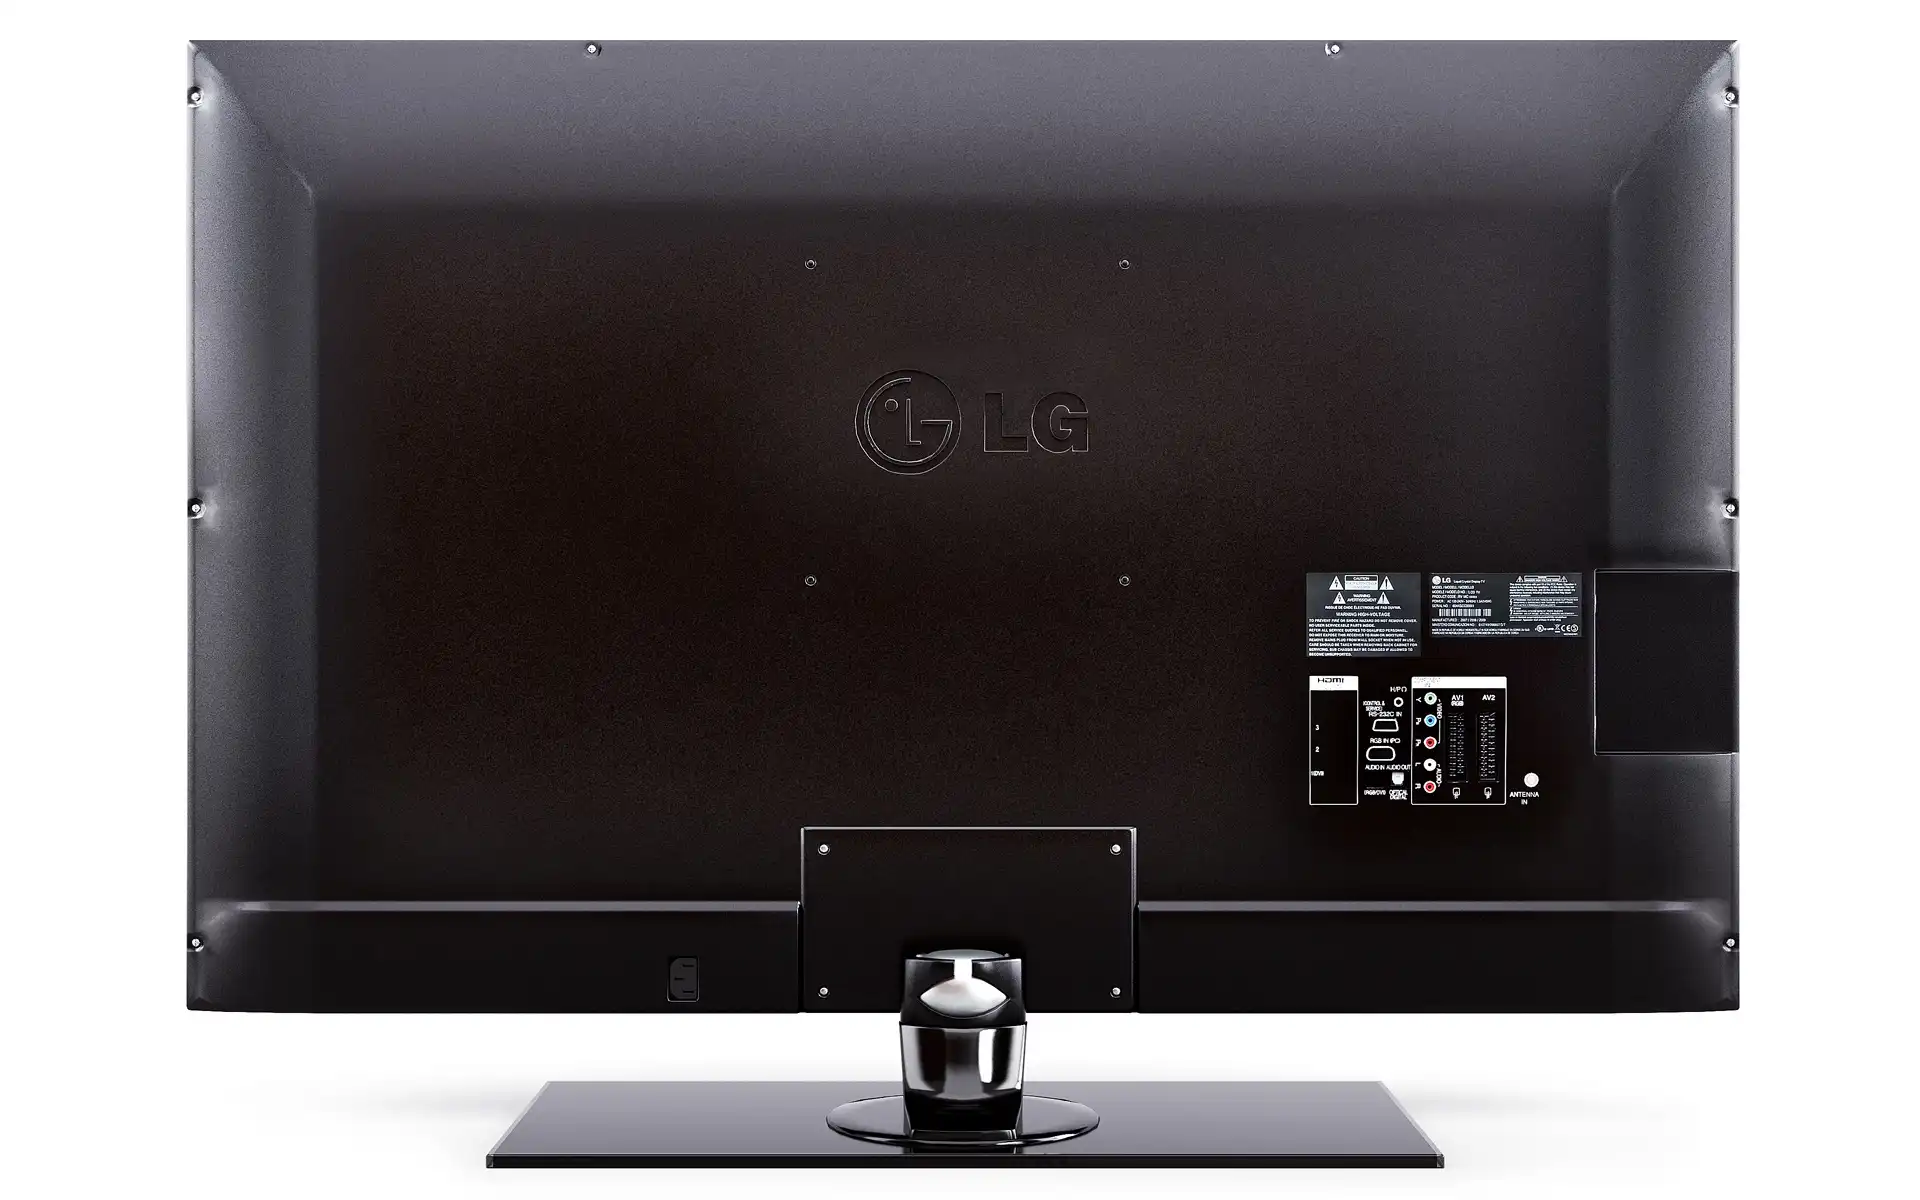 Photorealistic studio rendering of LCD television 3d model's back panel.